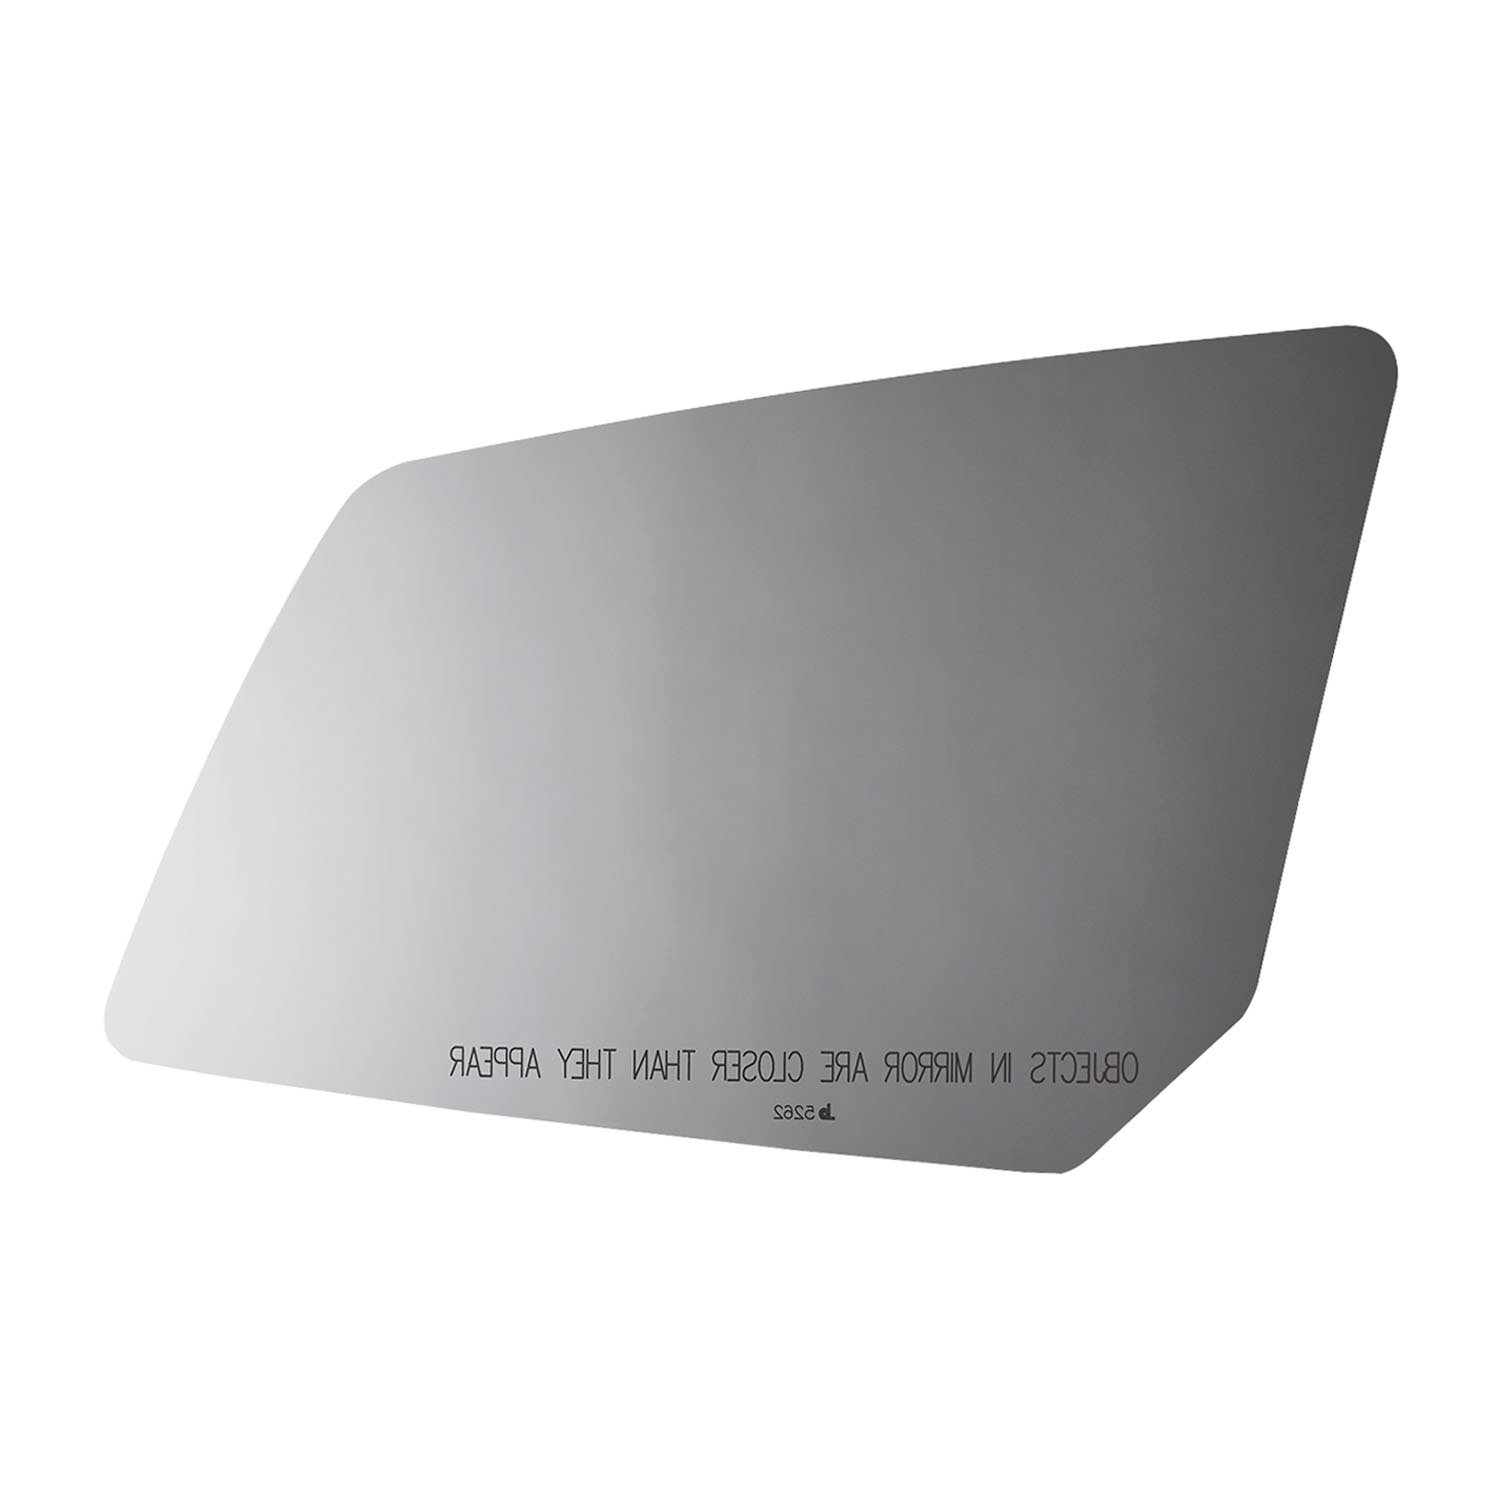 5262 SIDE VIEW MIRROR